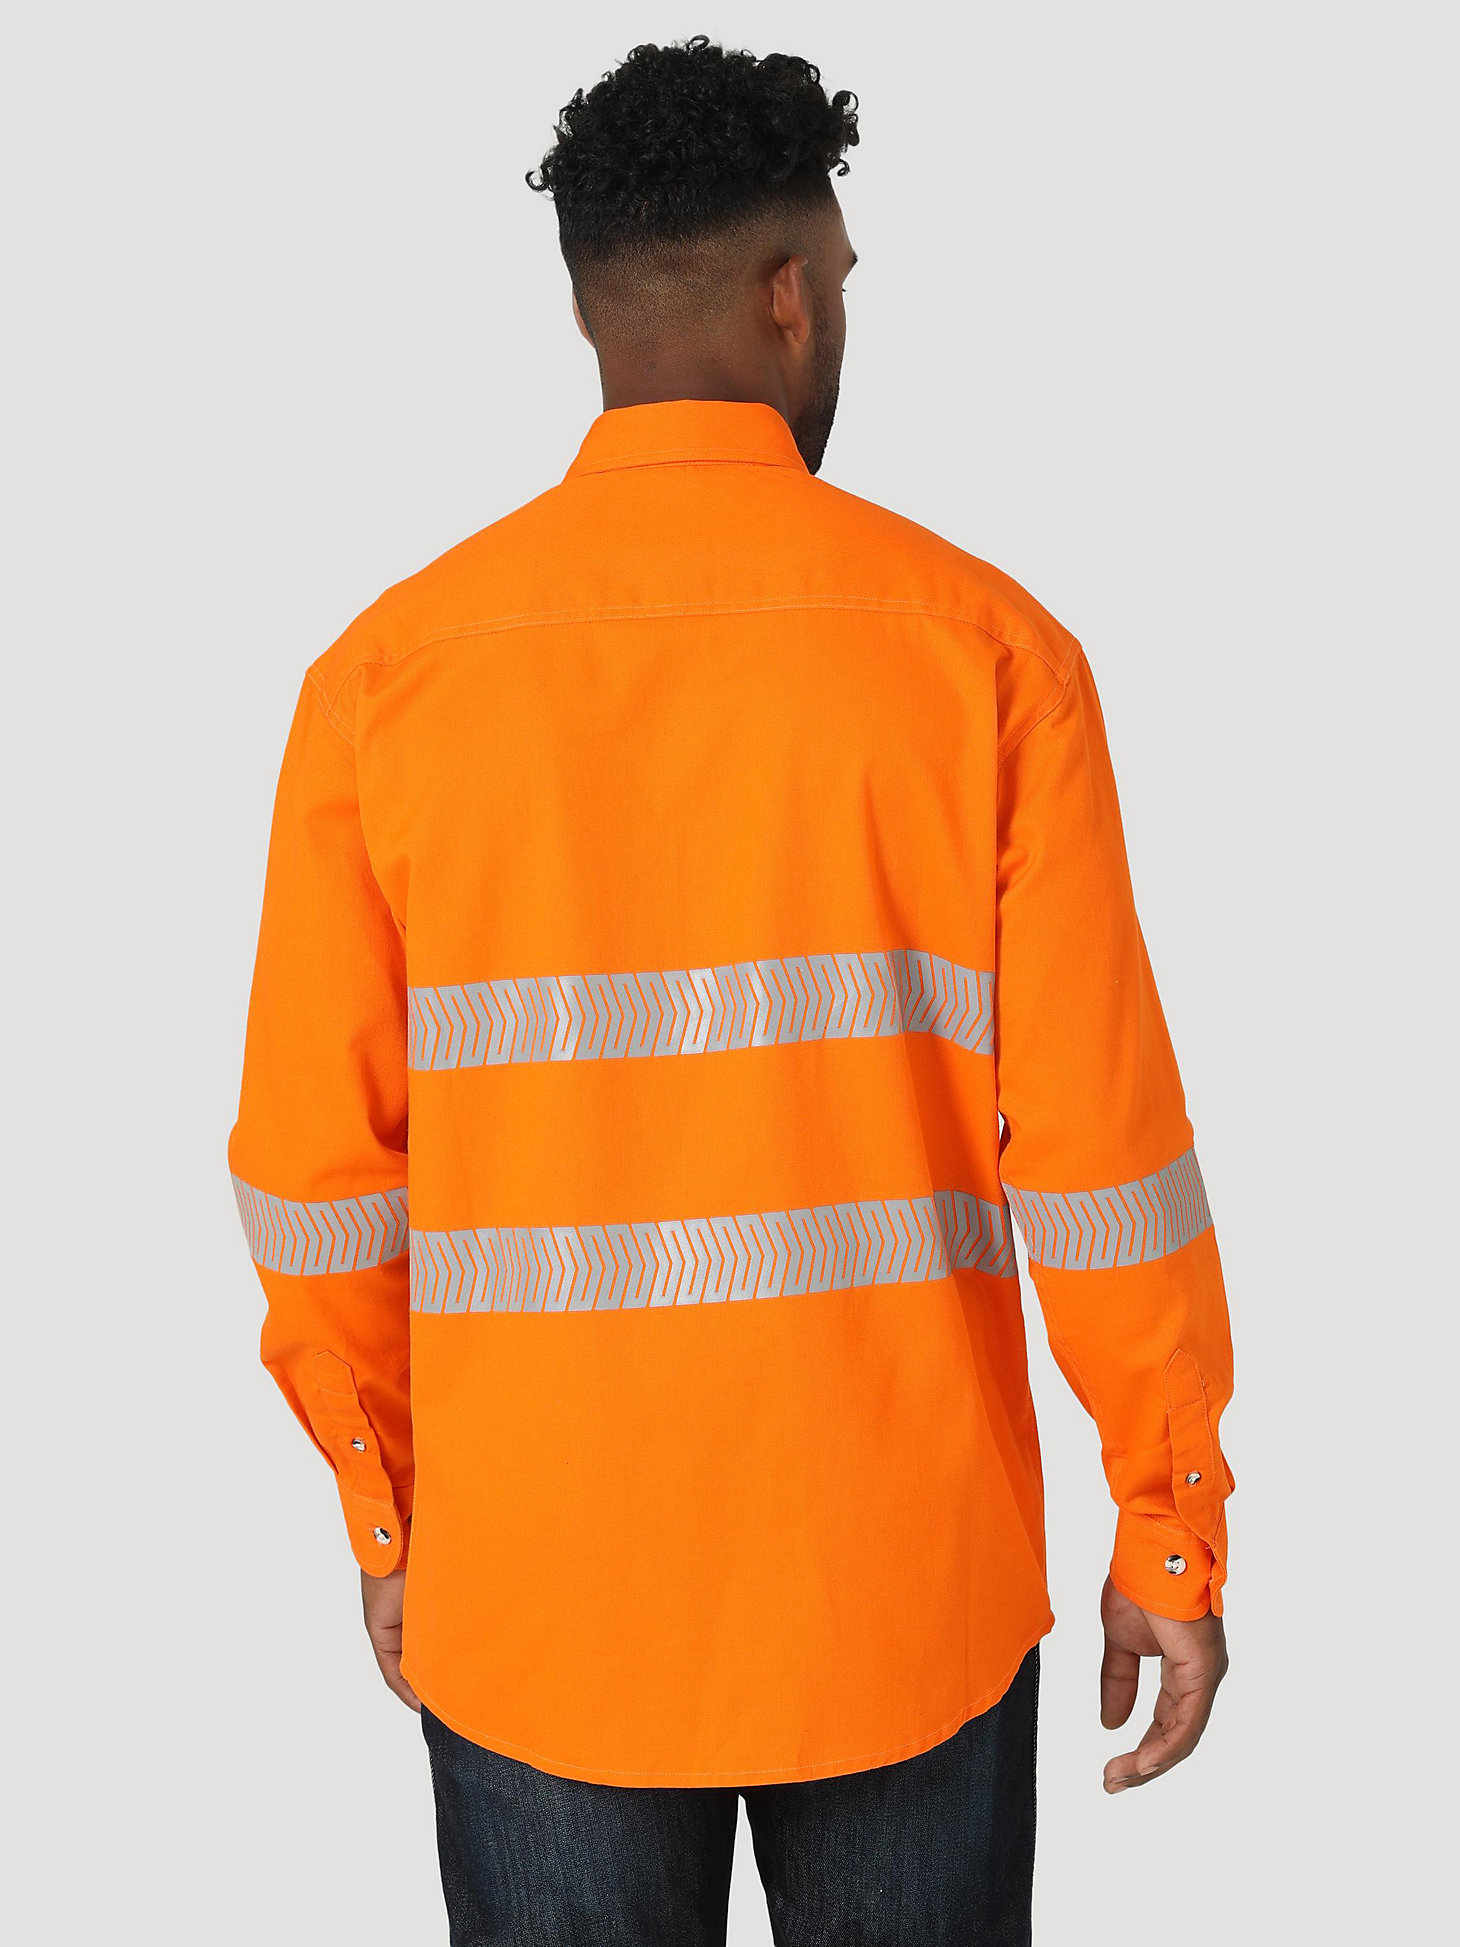 FR Flame Resistant High Visibility Work Shirt in Safety Orange alternative view 1